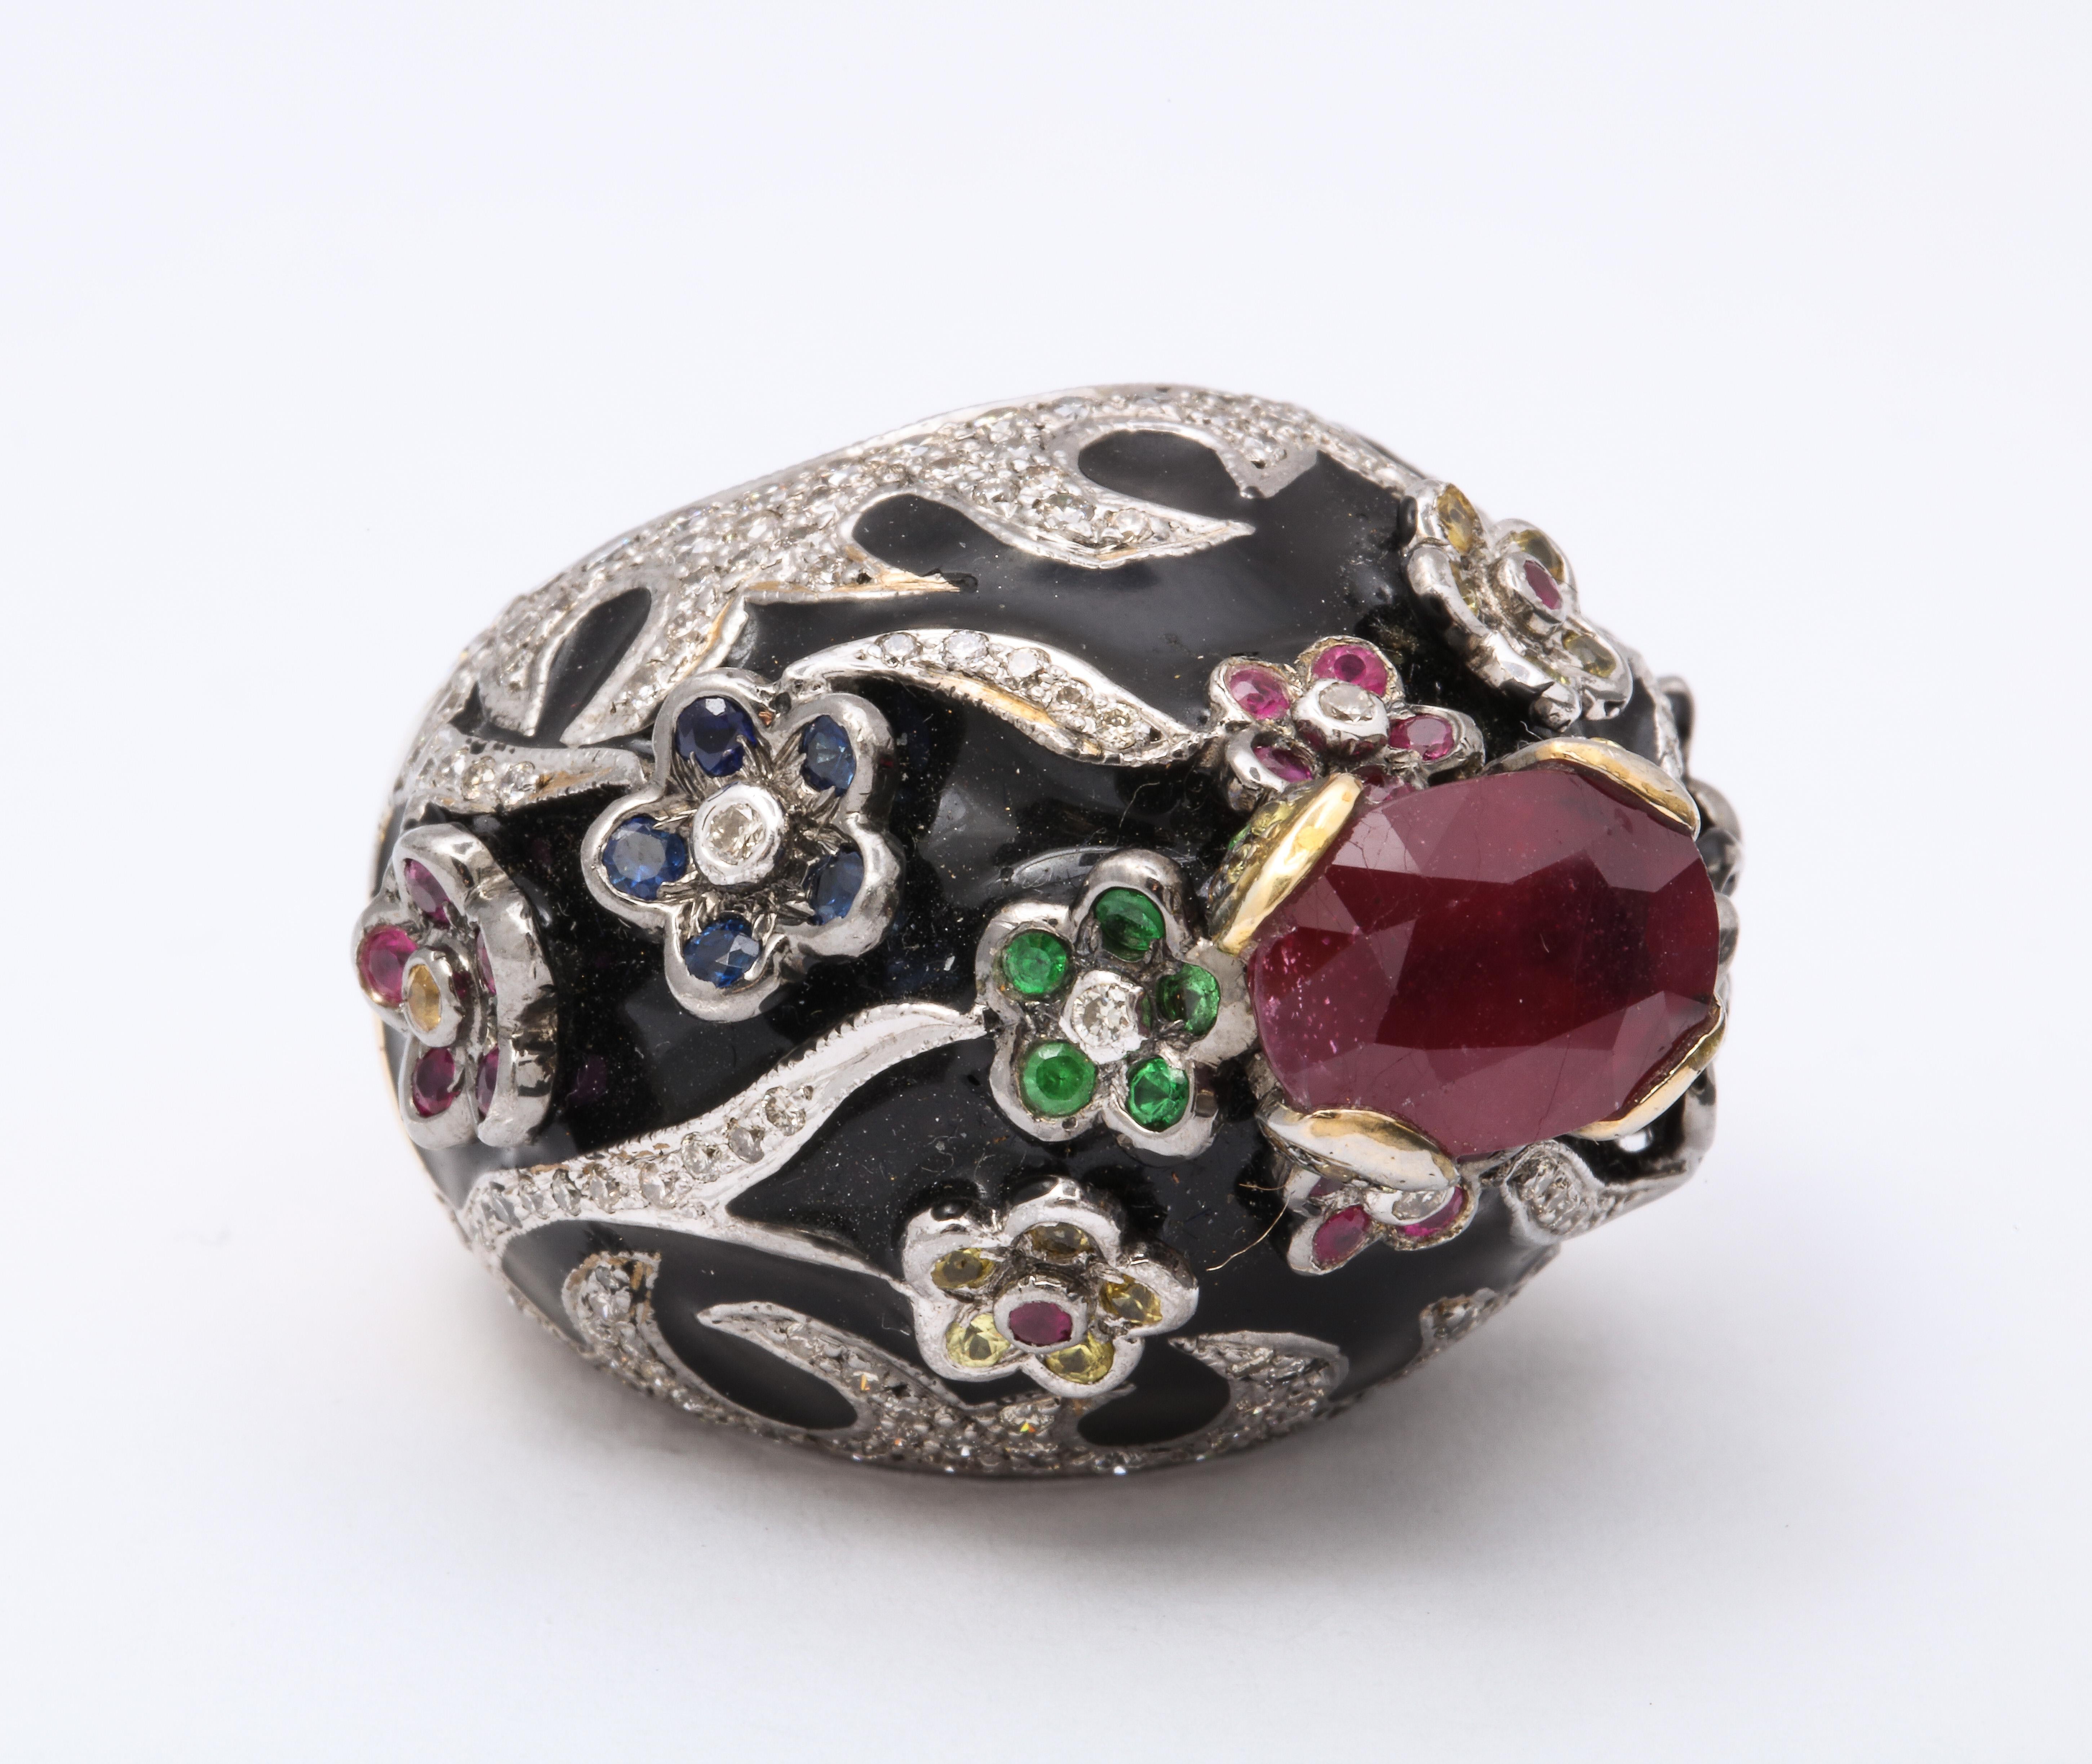 Modern  Runway black enamel ring in sterling with gold overlay.  137 full cut diamonds @ 2.0 carats tw as well as emeralds, sapphires, citrine rounds.  Oval center ruby @ 3.0 carats. Size 8 1/2.   

Materials:
Black enamel
Sterling
Gold